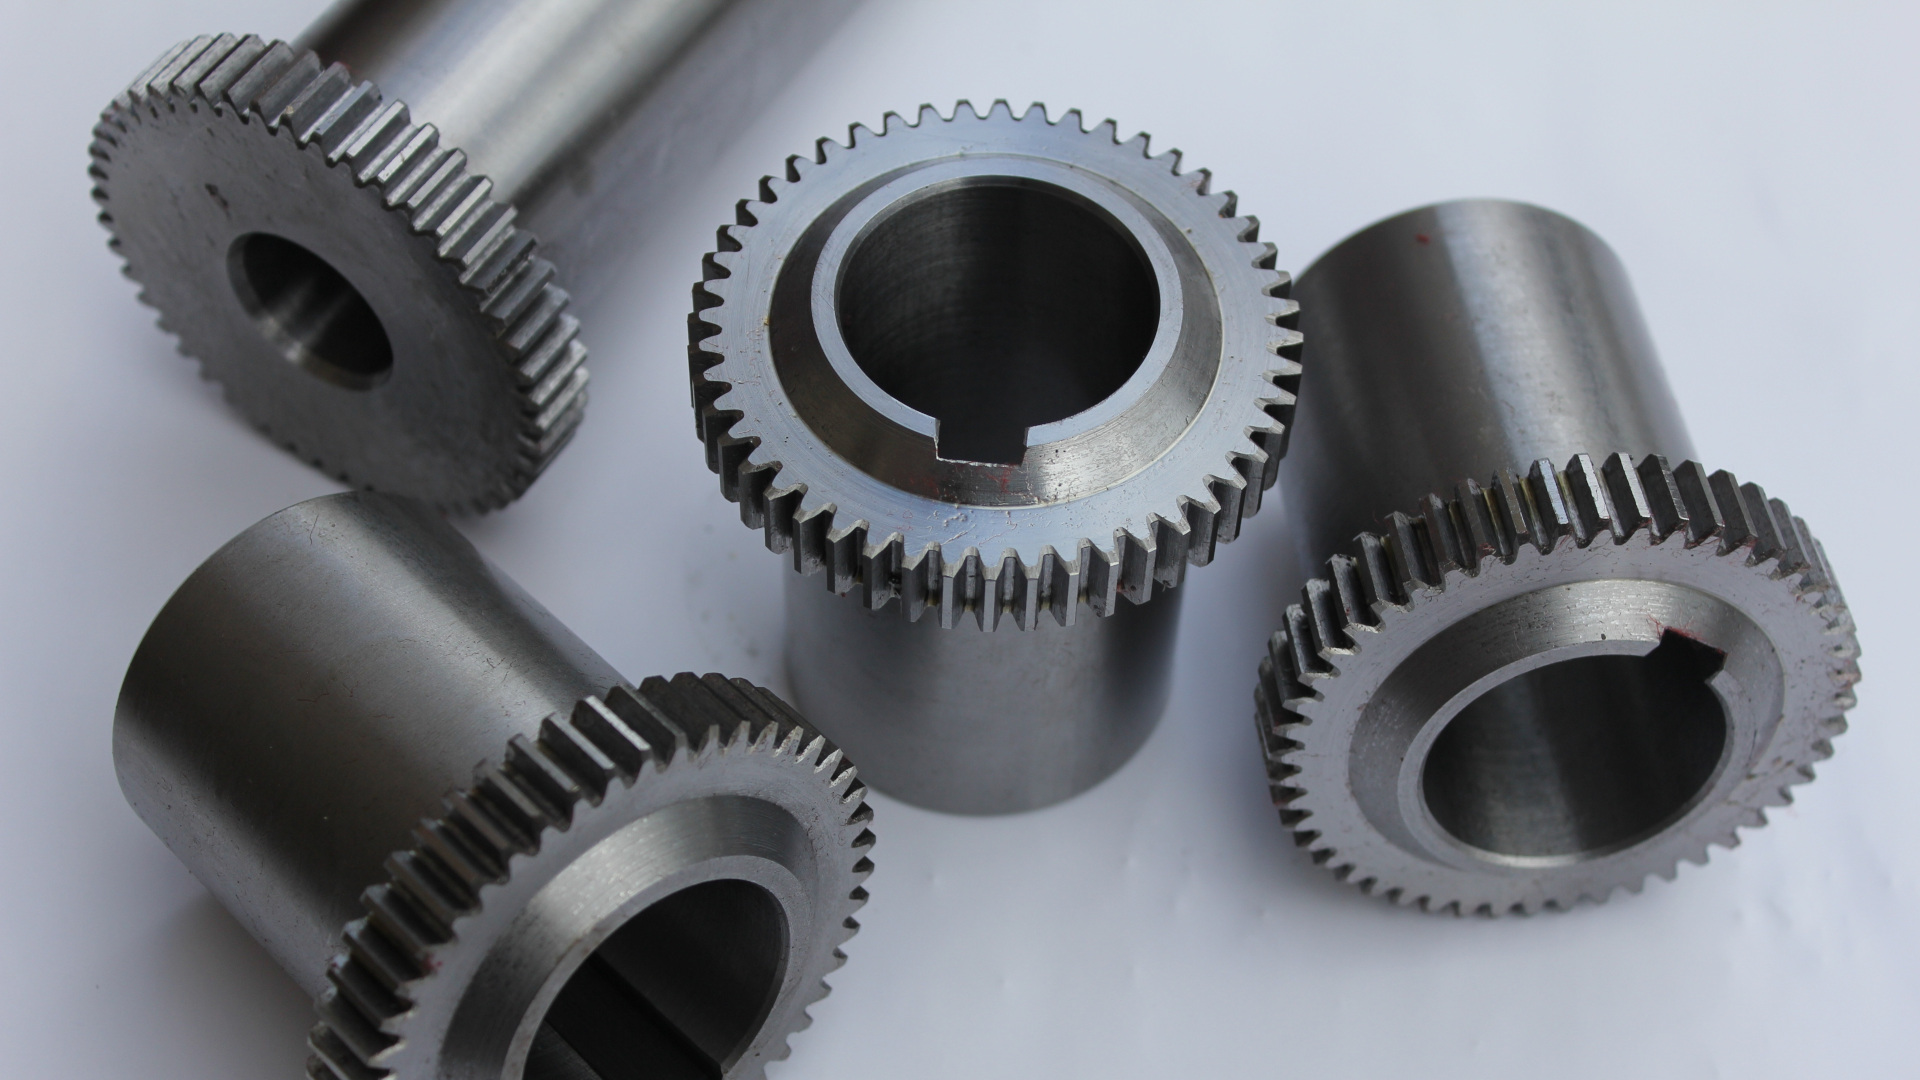 Machined gears displayed on a desk, showcasing the precision and quality of the machining process.